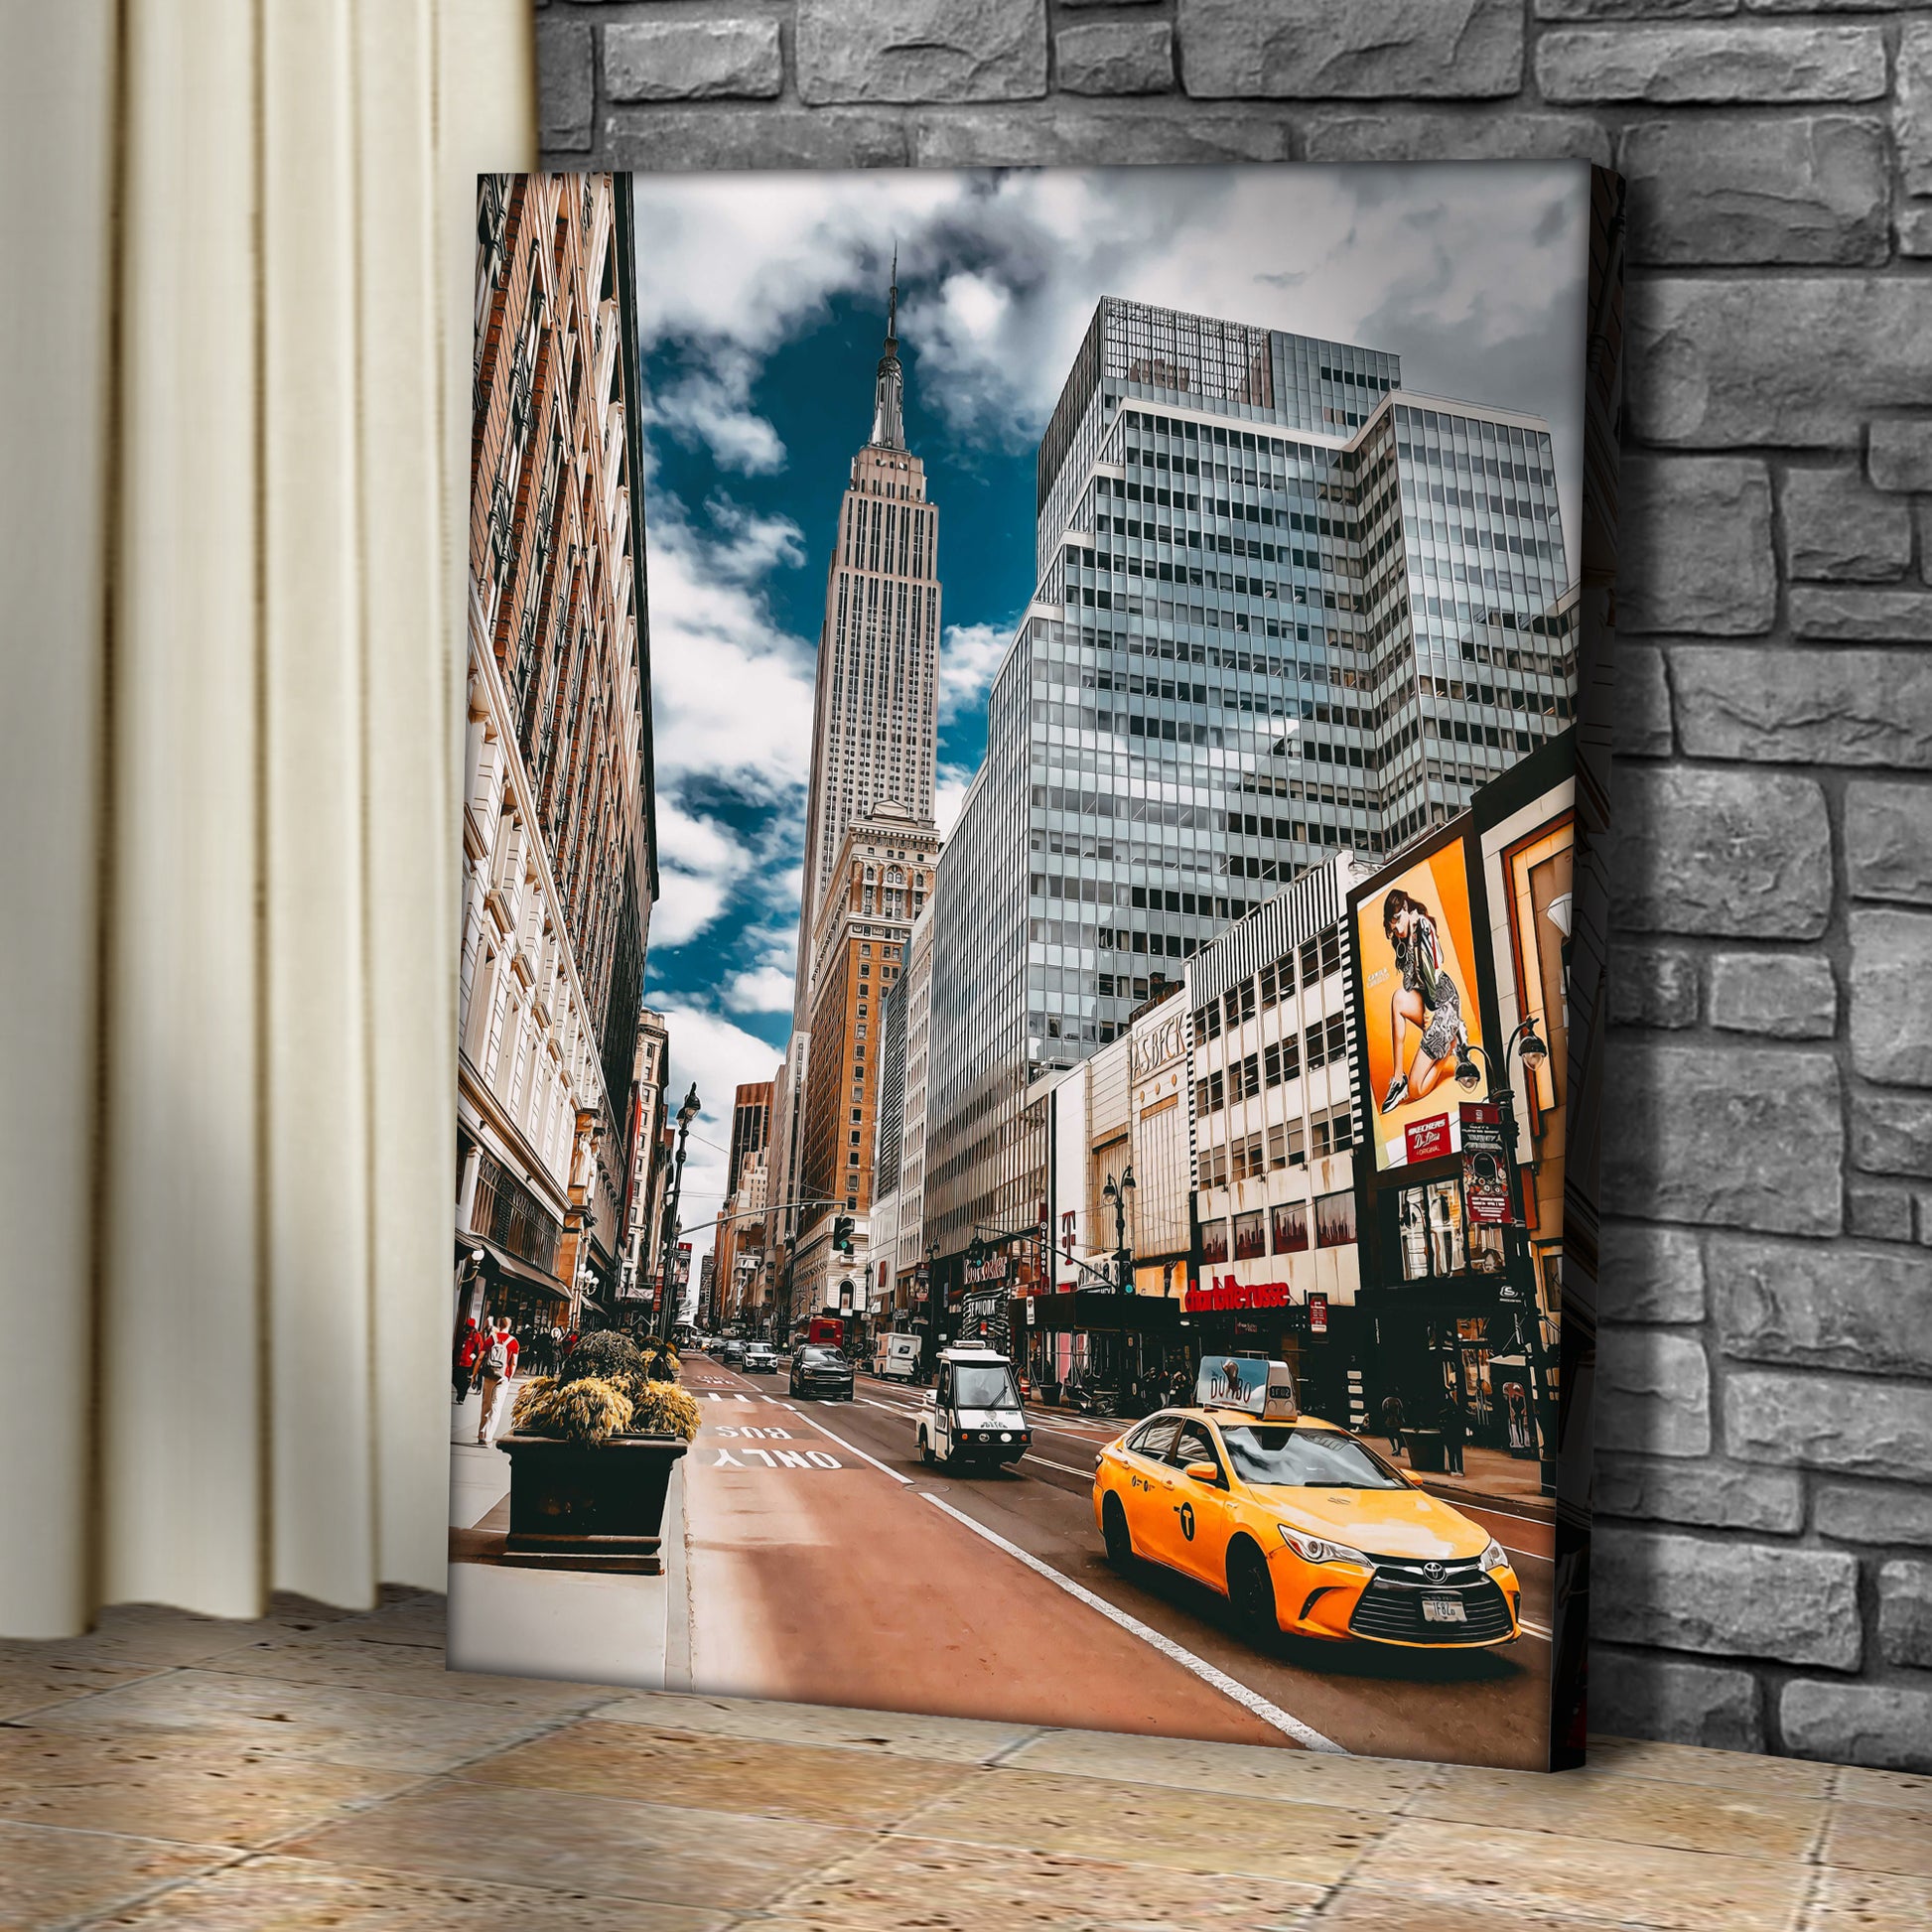 Along The Street Of New York City Canvas Wall Art Style 1 - Image by Tailored Canvases